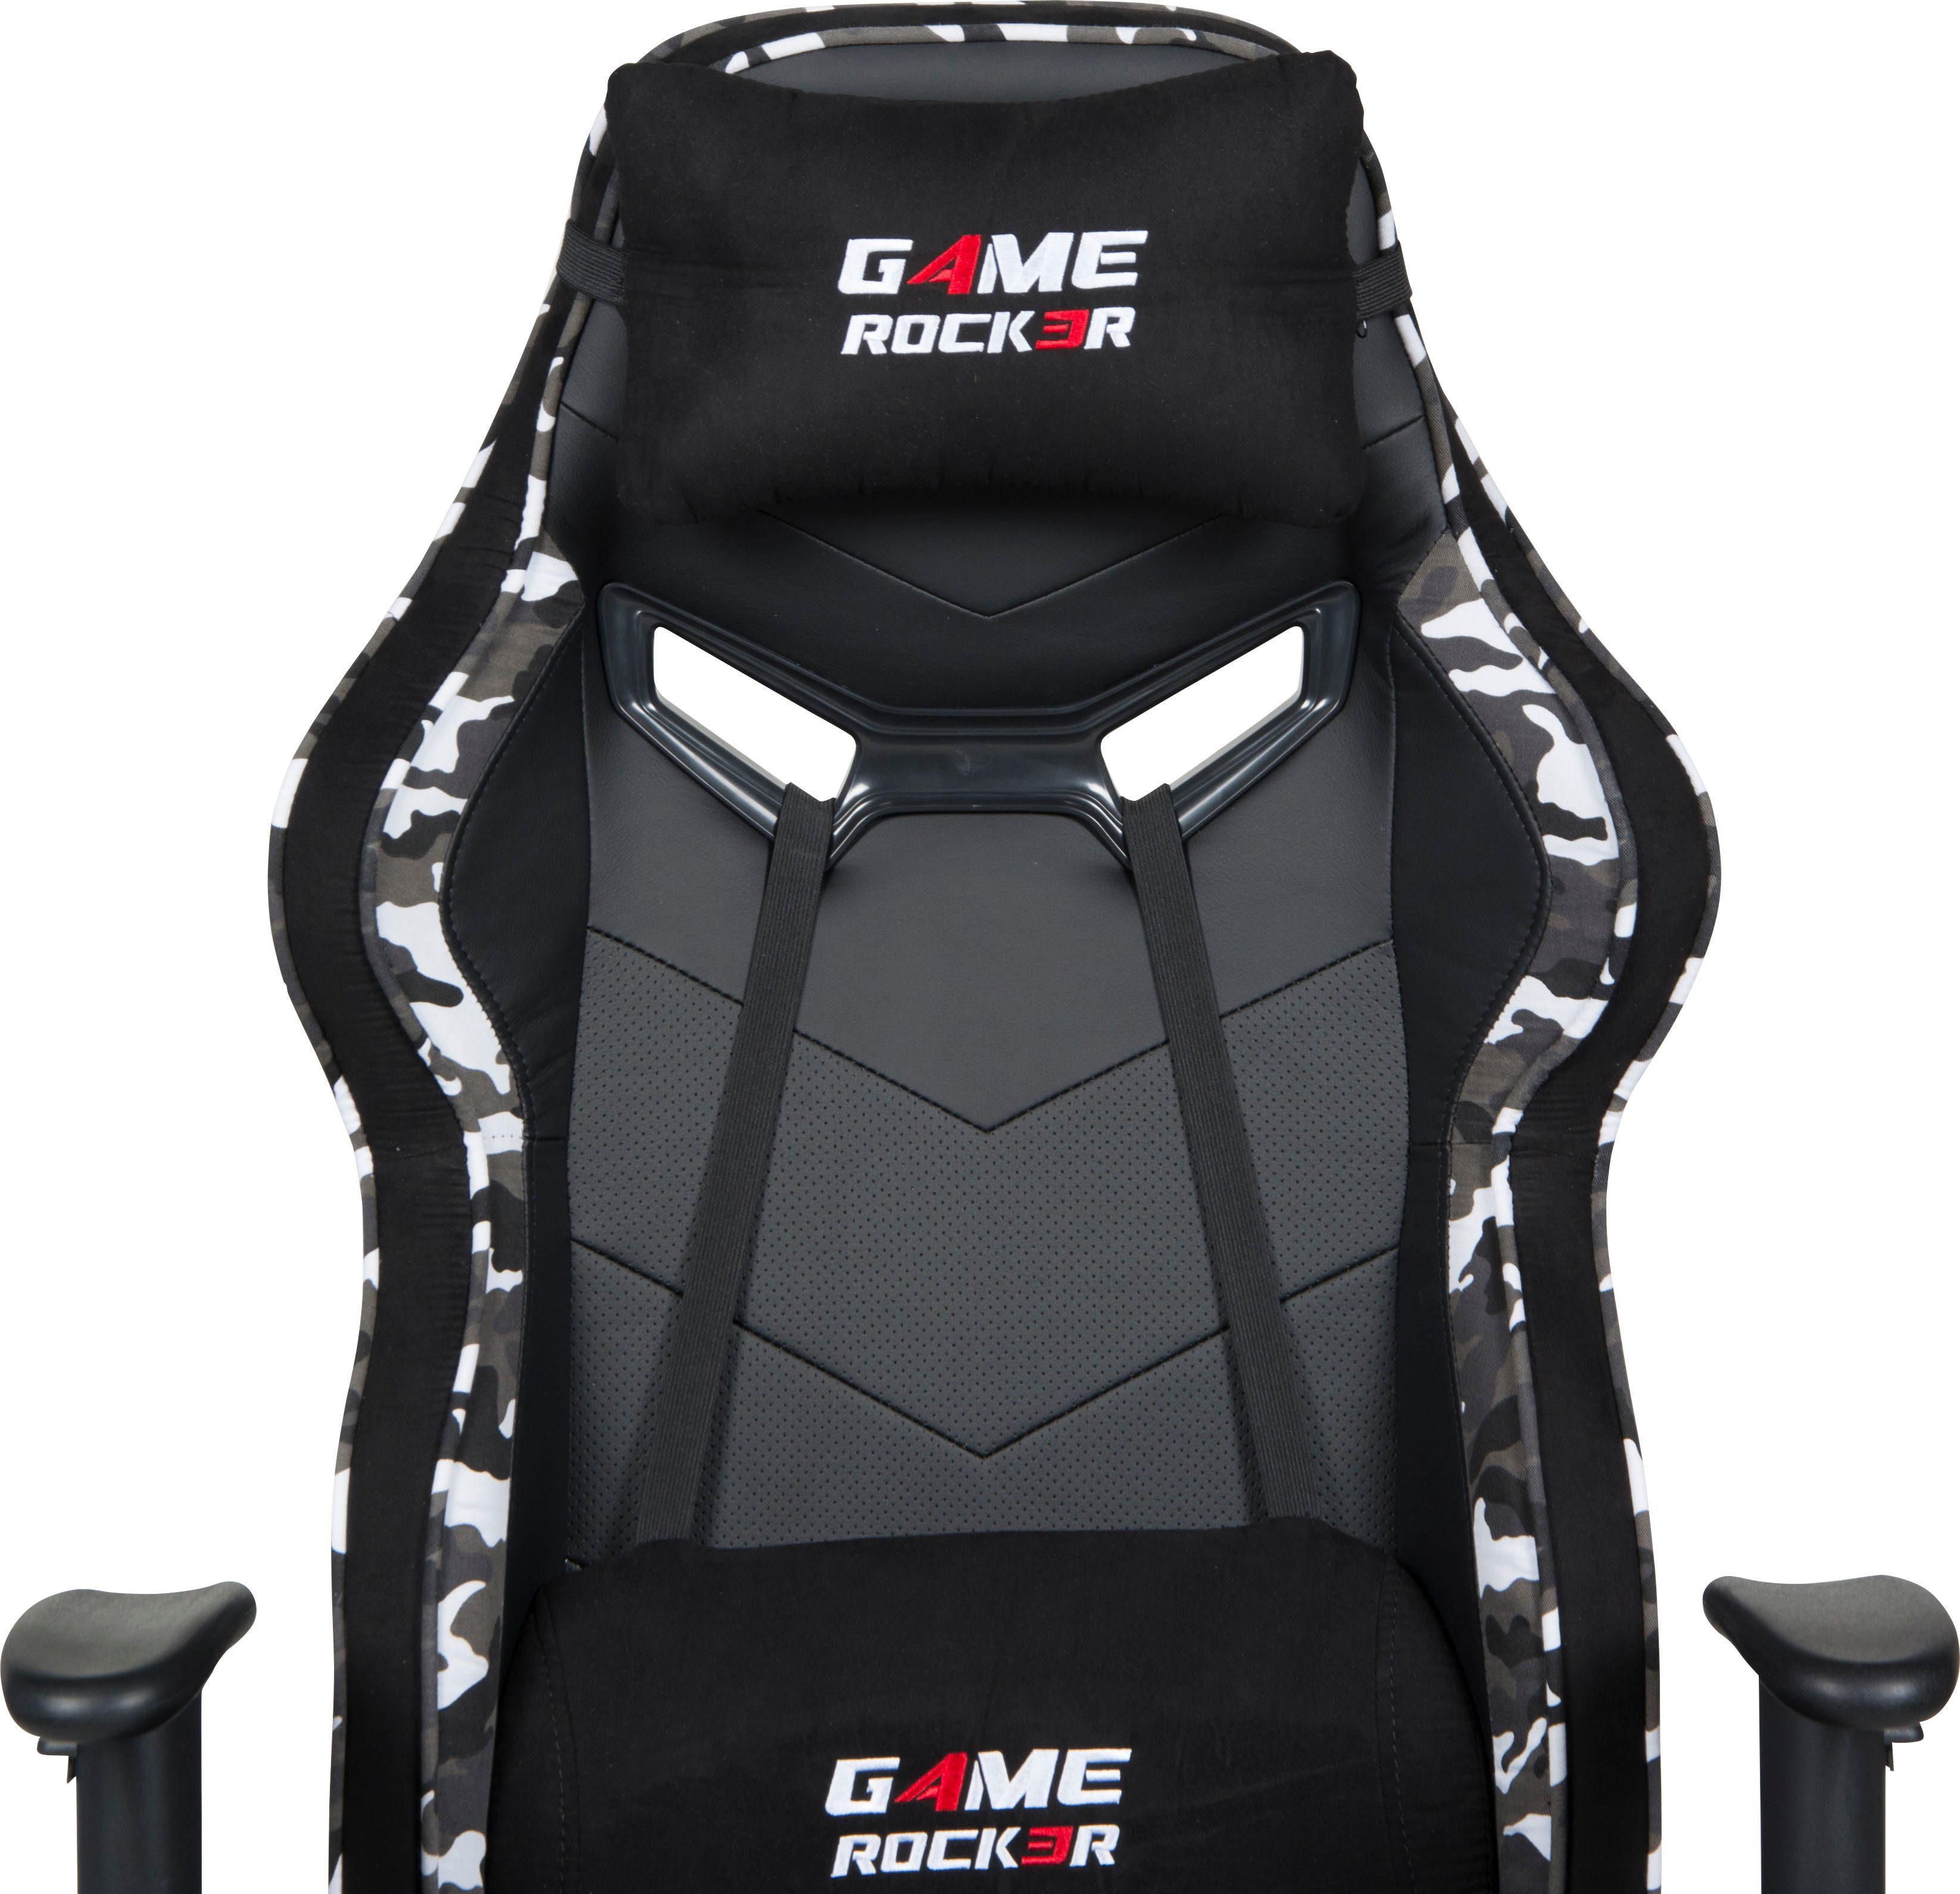 schwarz/camouflage grau Collection in Chair G-30, Game-Rocker Optik Camouflage Chefsessel Gaming Duo